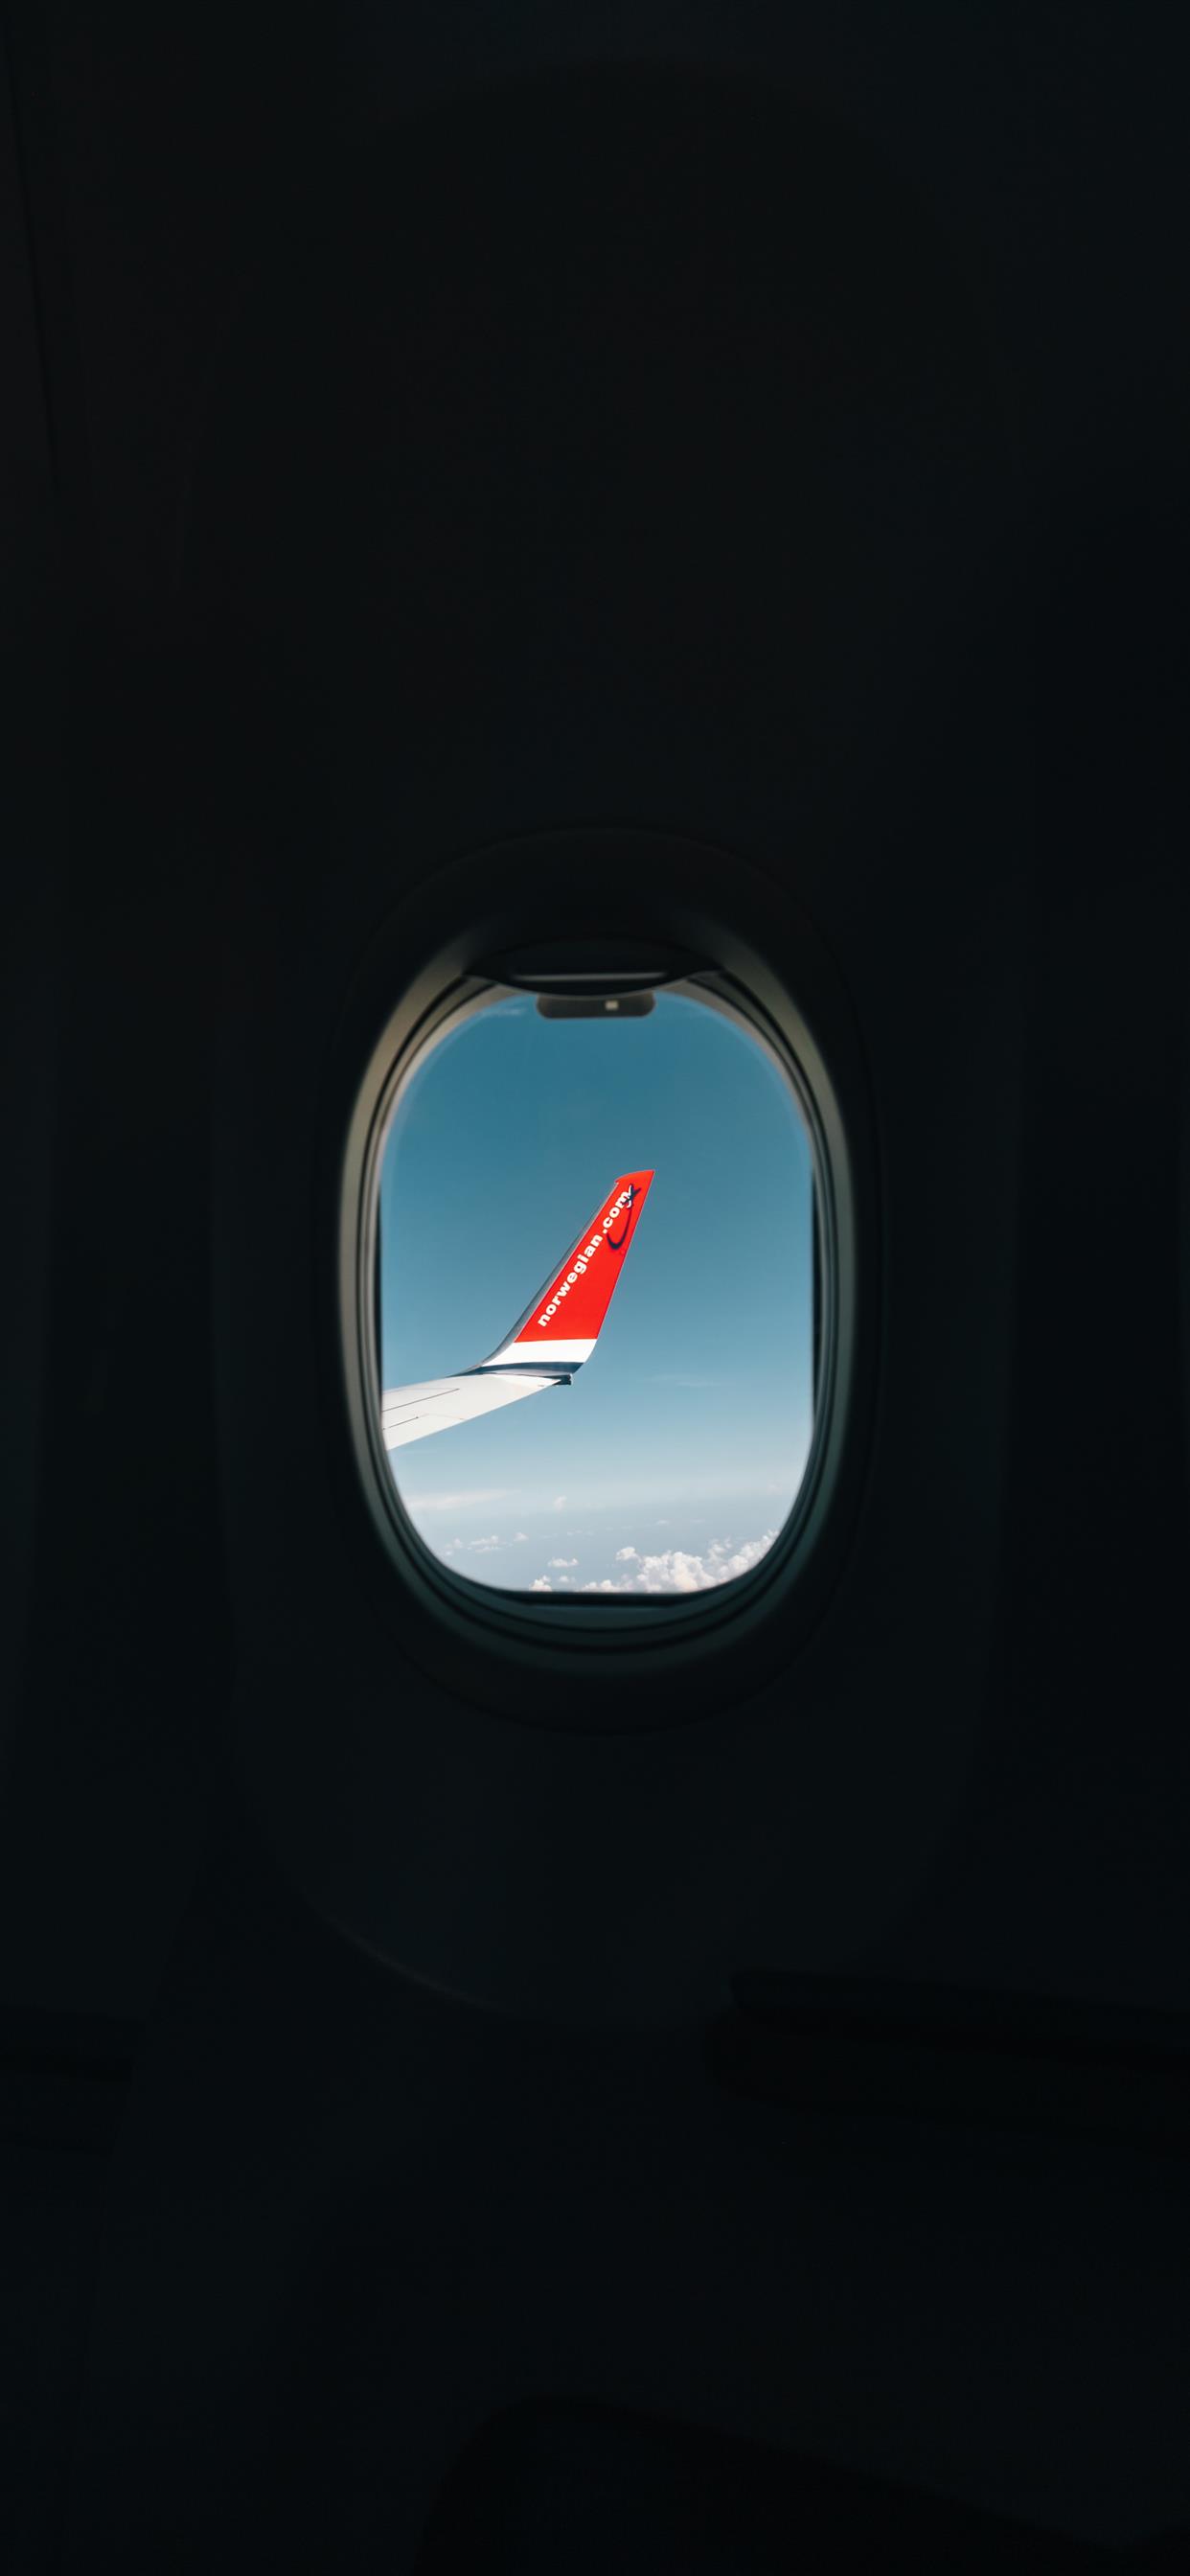 red airplane wing through window iPhone X Wallpaper Free Download